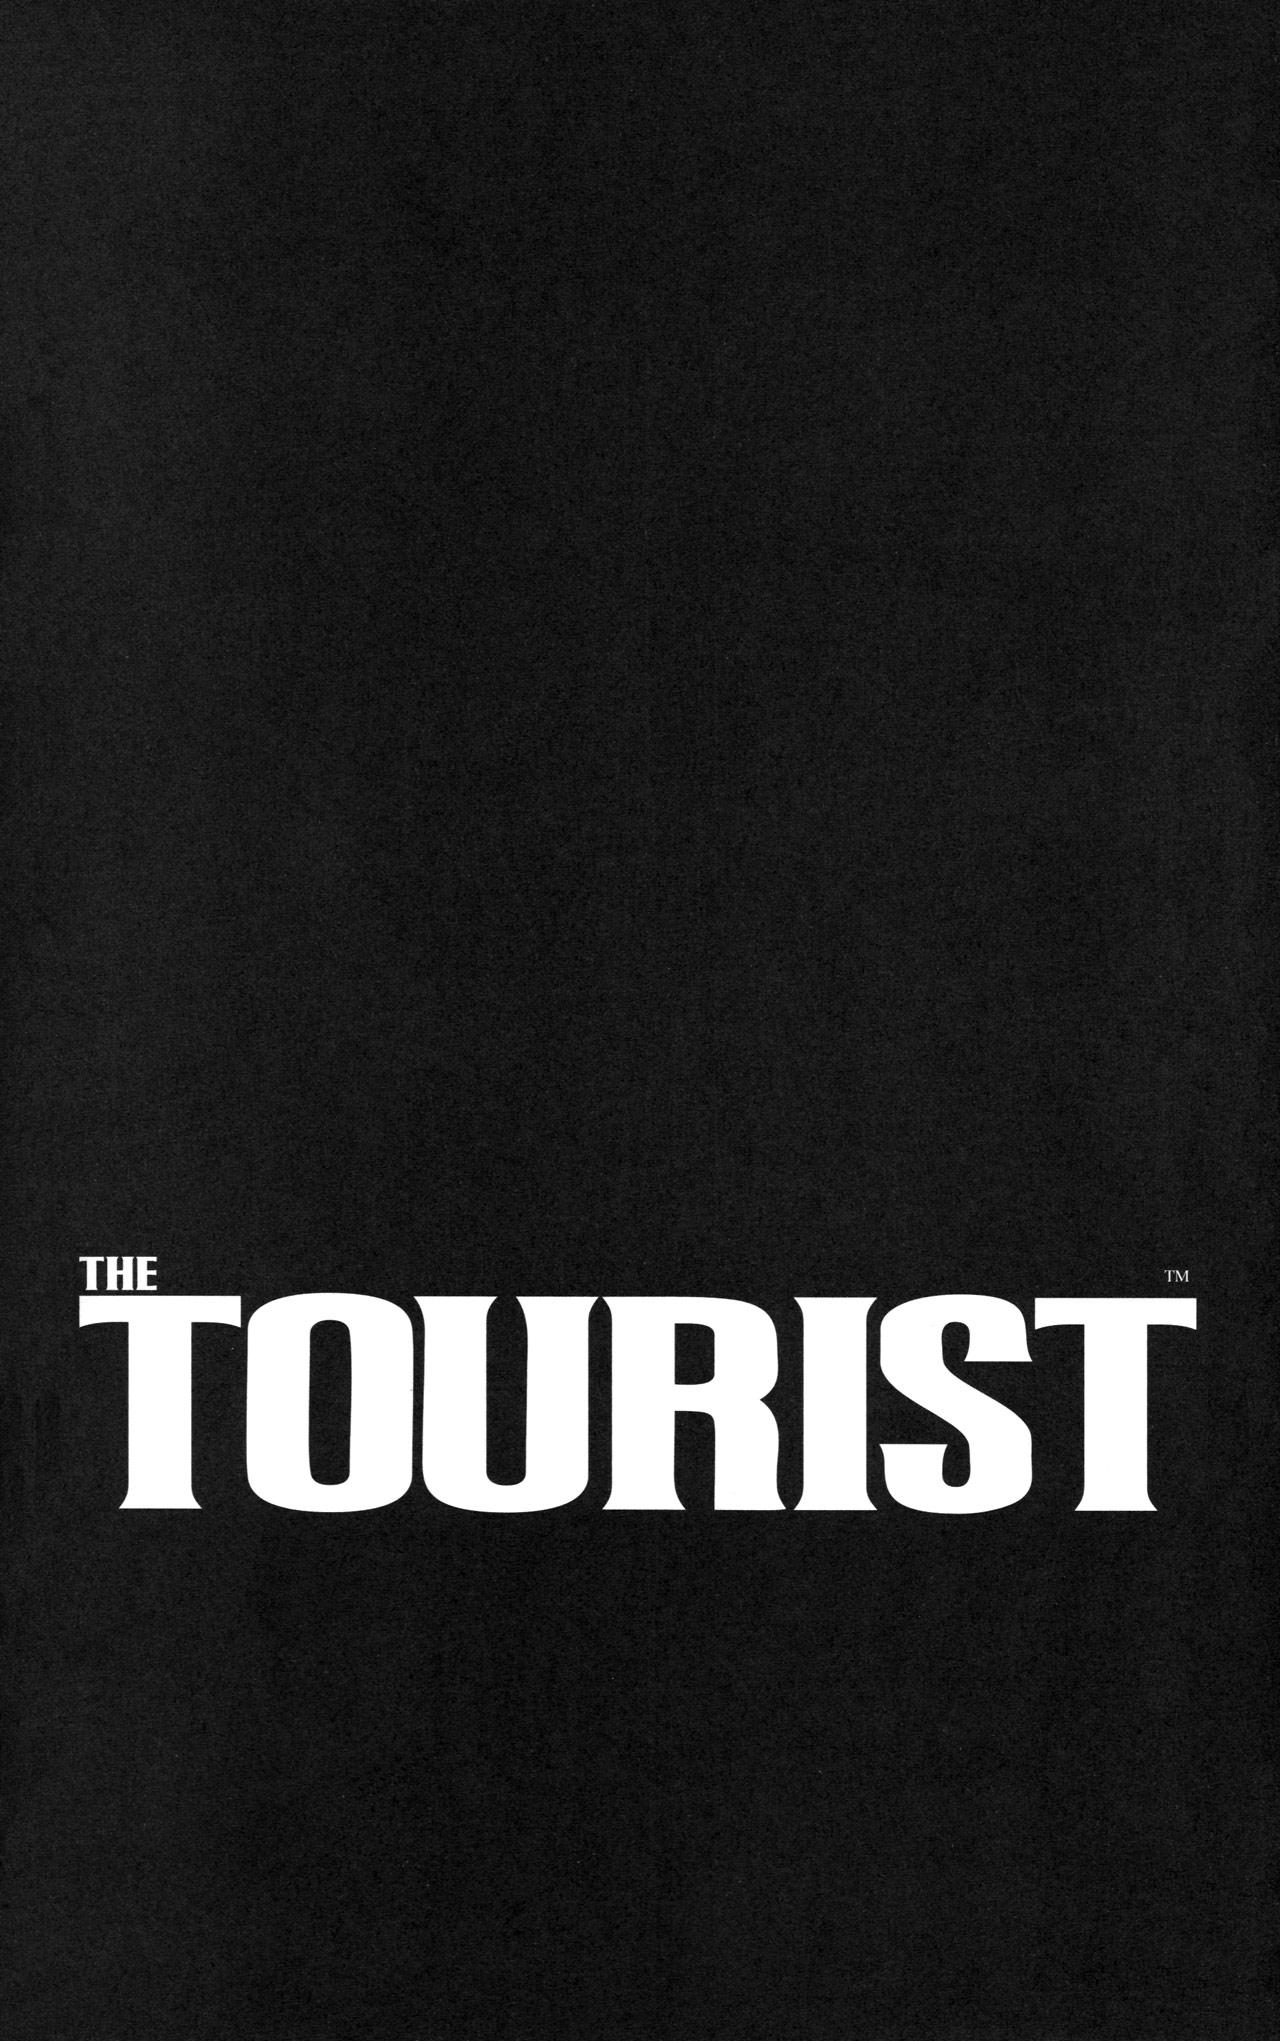 Read online The Tourist comic -  Issue # TPB - 3